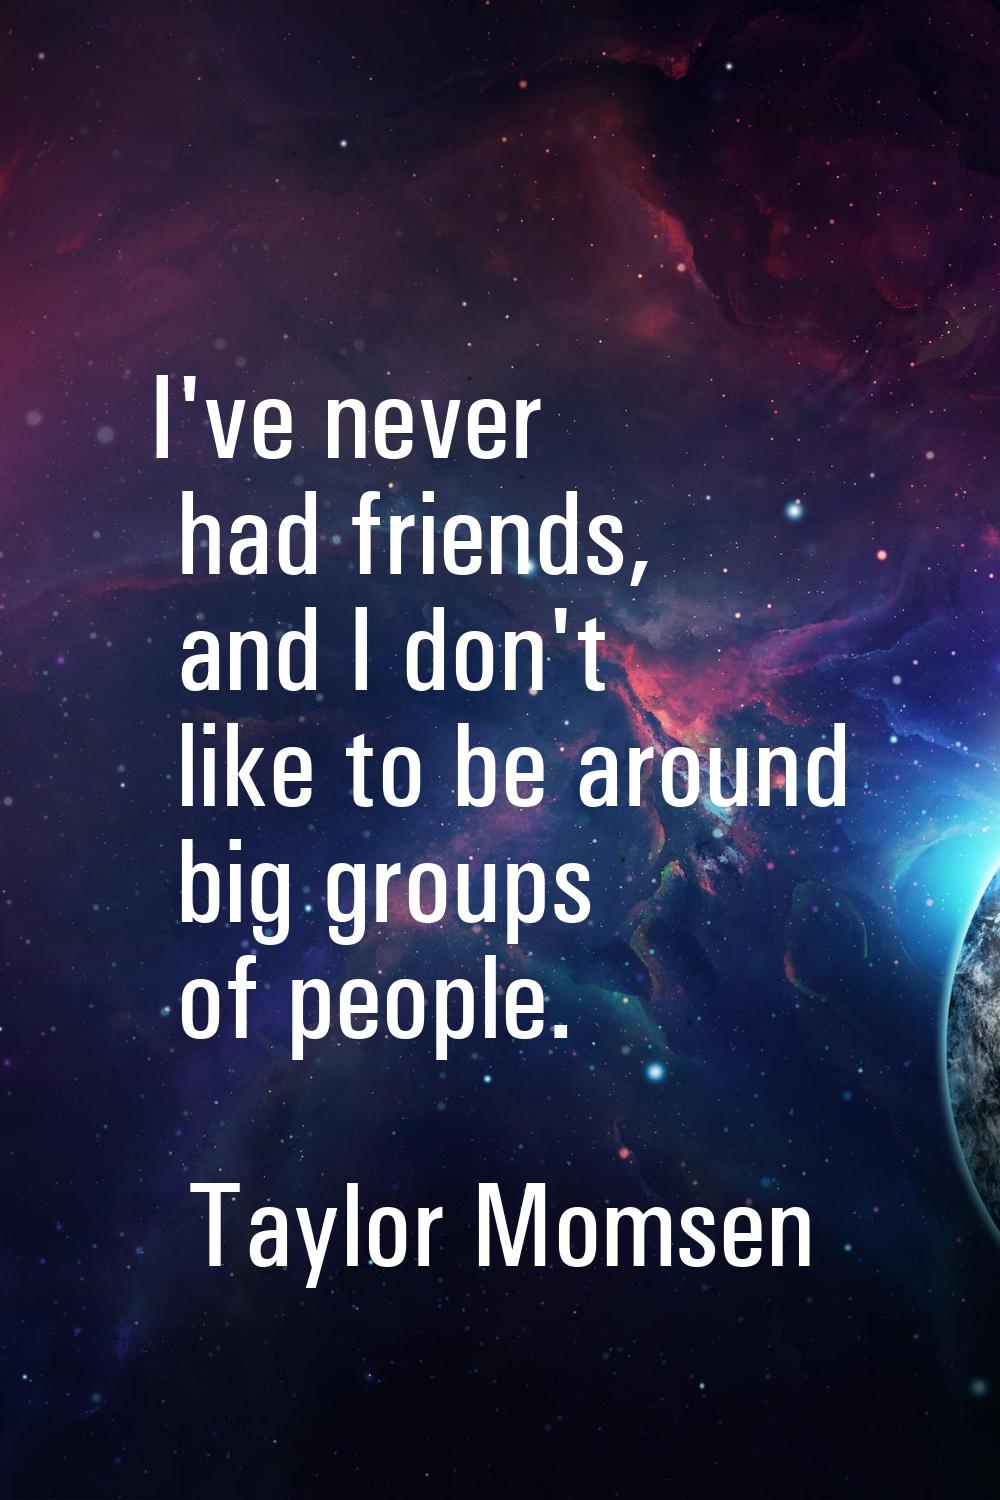 I've never had friends, and I don't like to be around big groups of people.